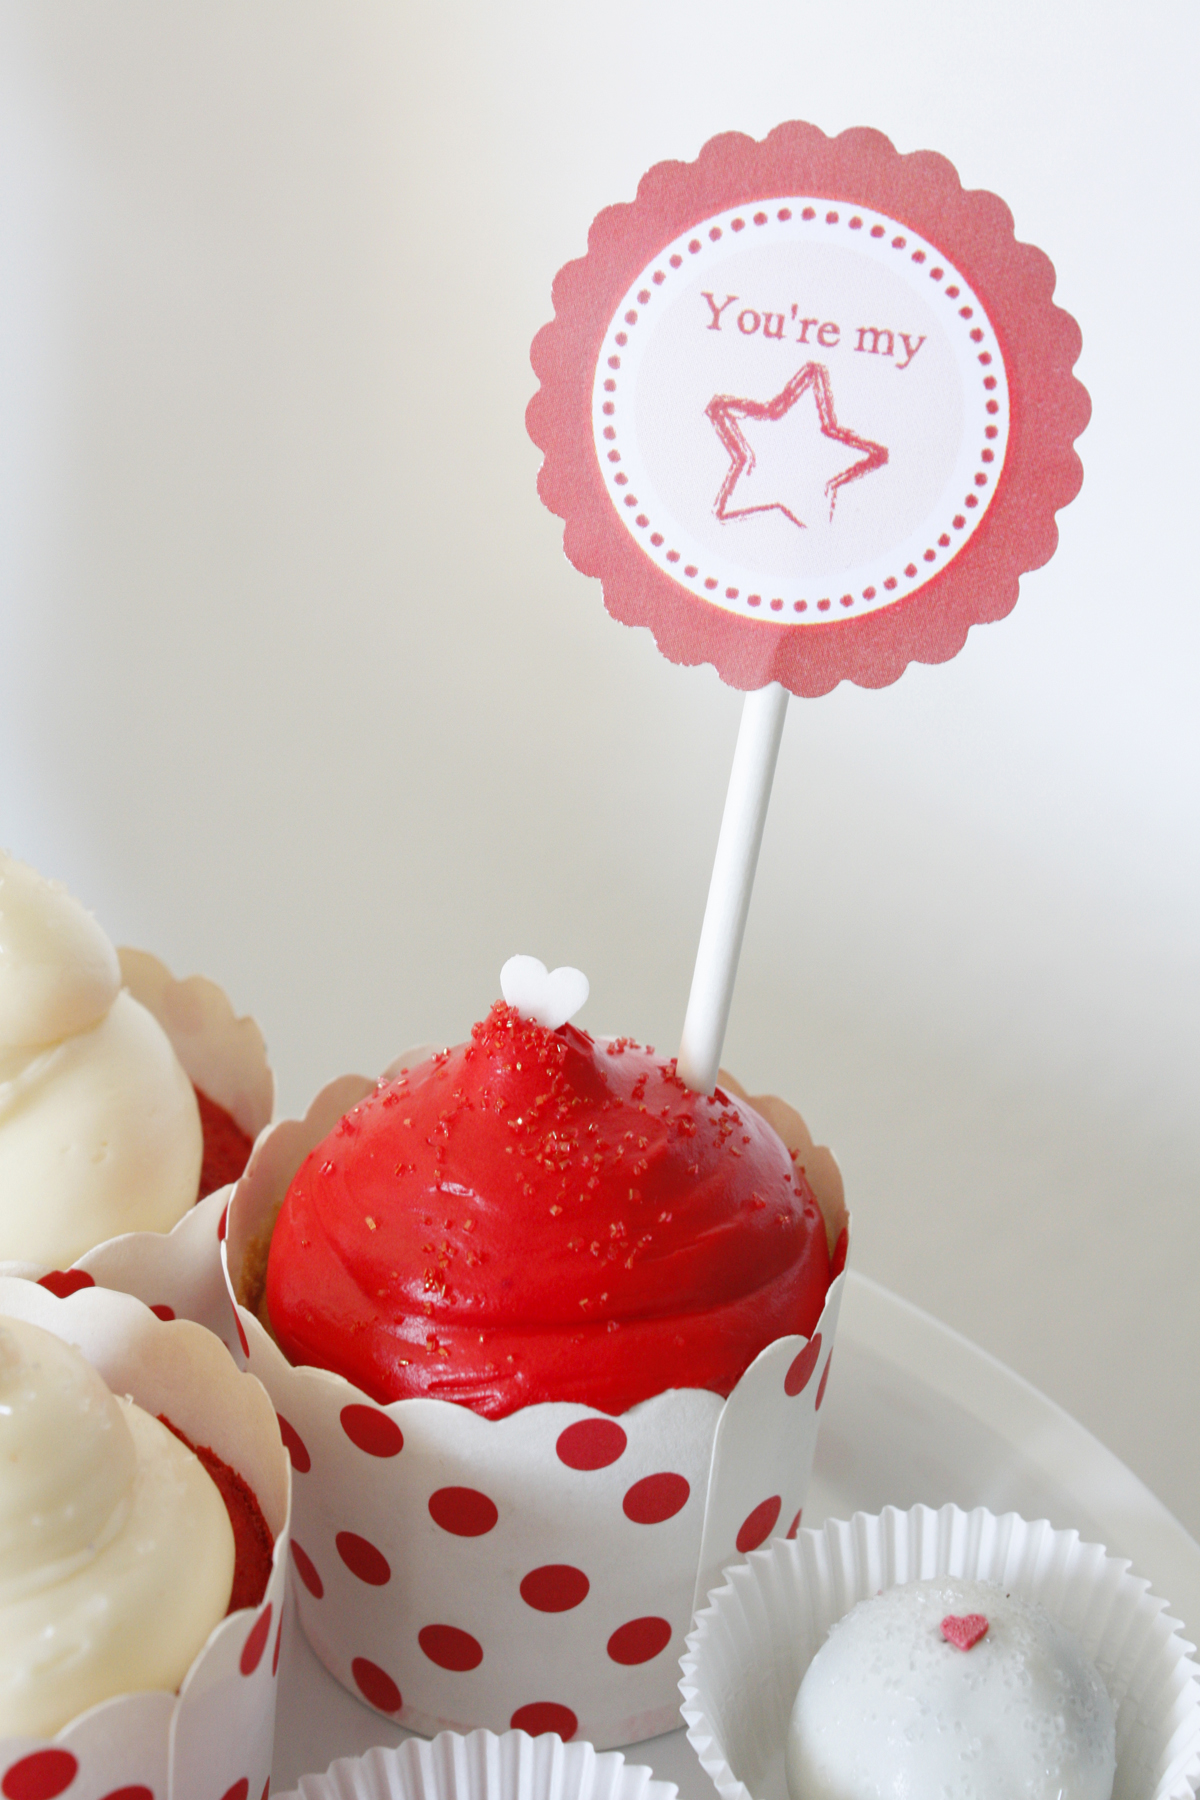 Valentine's Day Cupcakes for local TV Show in Germany - you are my star cupcake topper